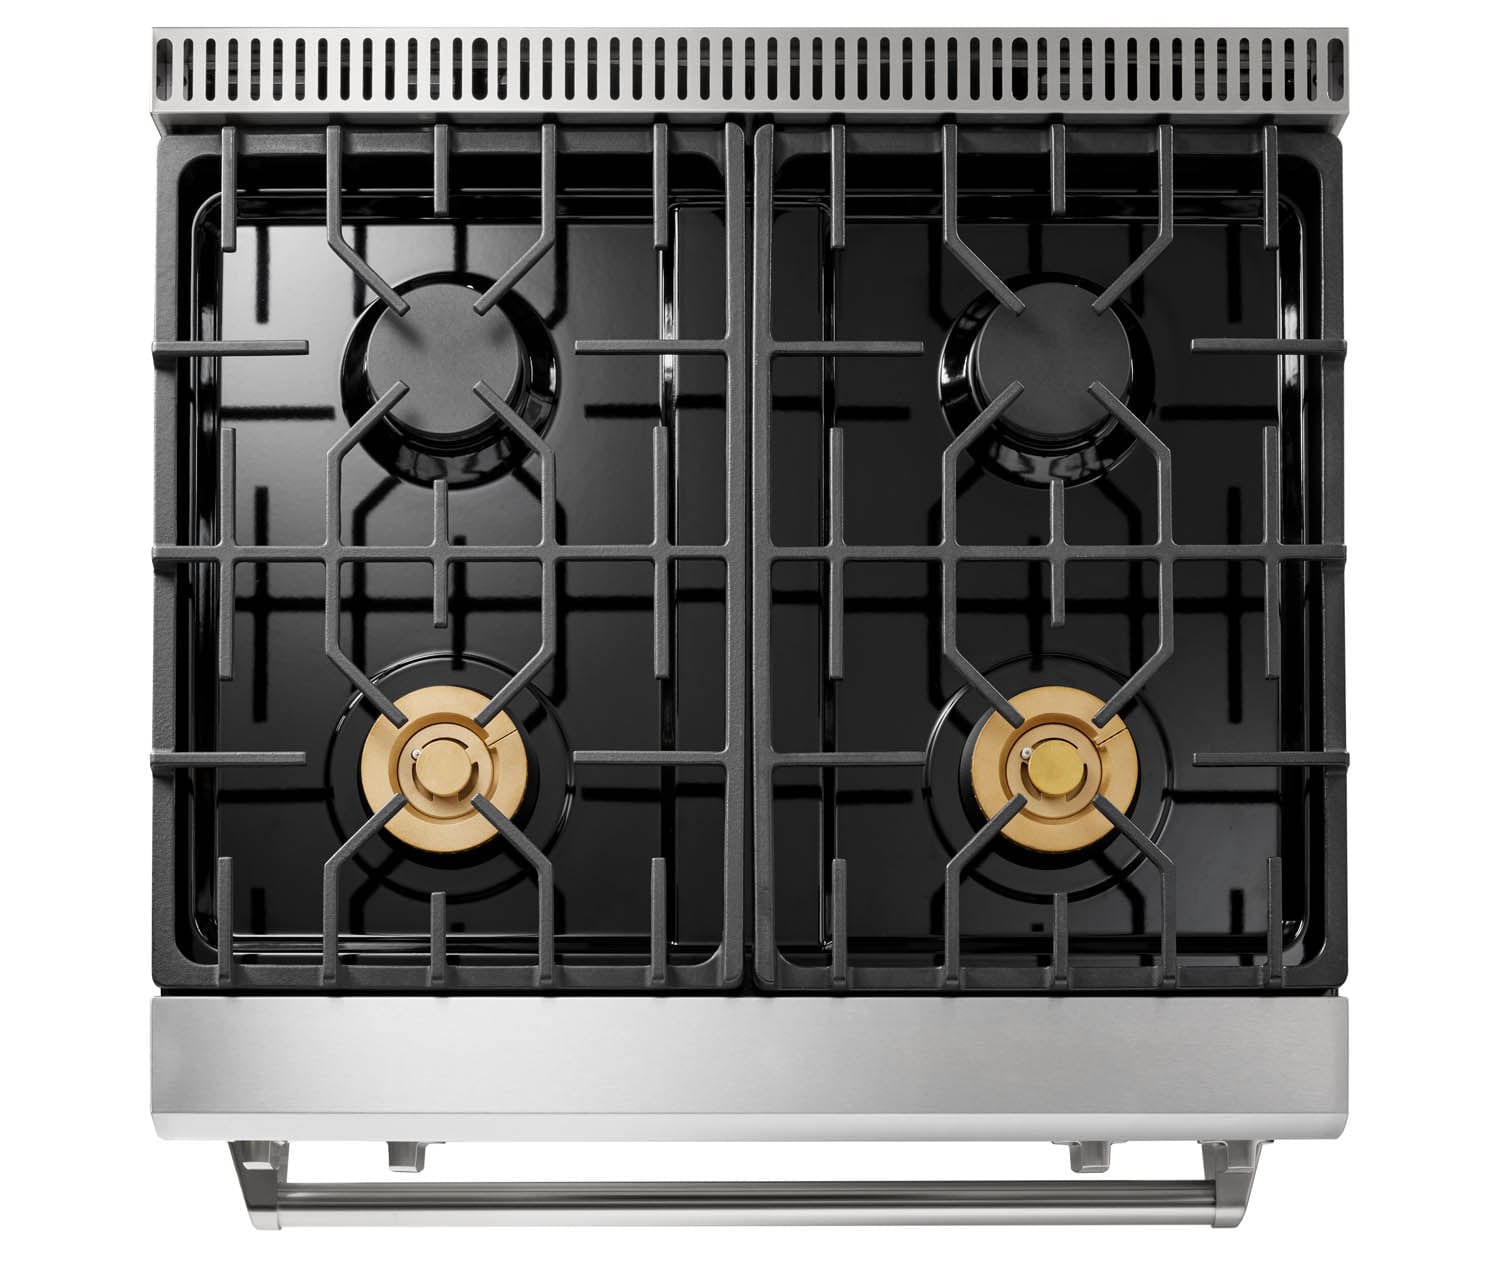 Thor Kitchen 30 In. 4.6 cu. ft. Self-Clean Gas Range in Stainless Steel with Front Touch Control TRG3001 Ranges TRG3001 Luxury Appliances Direct